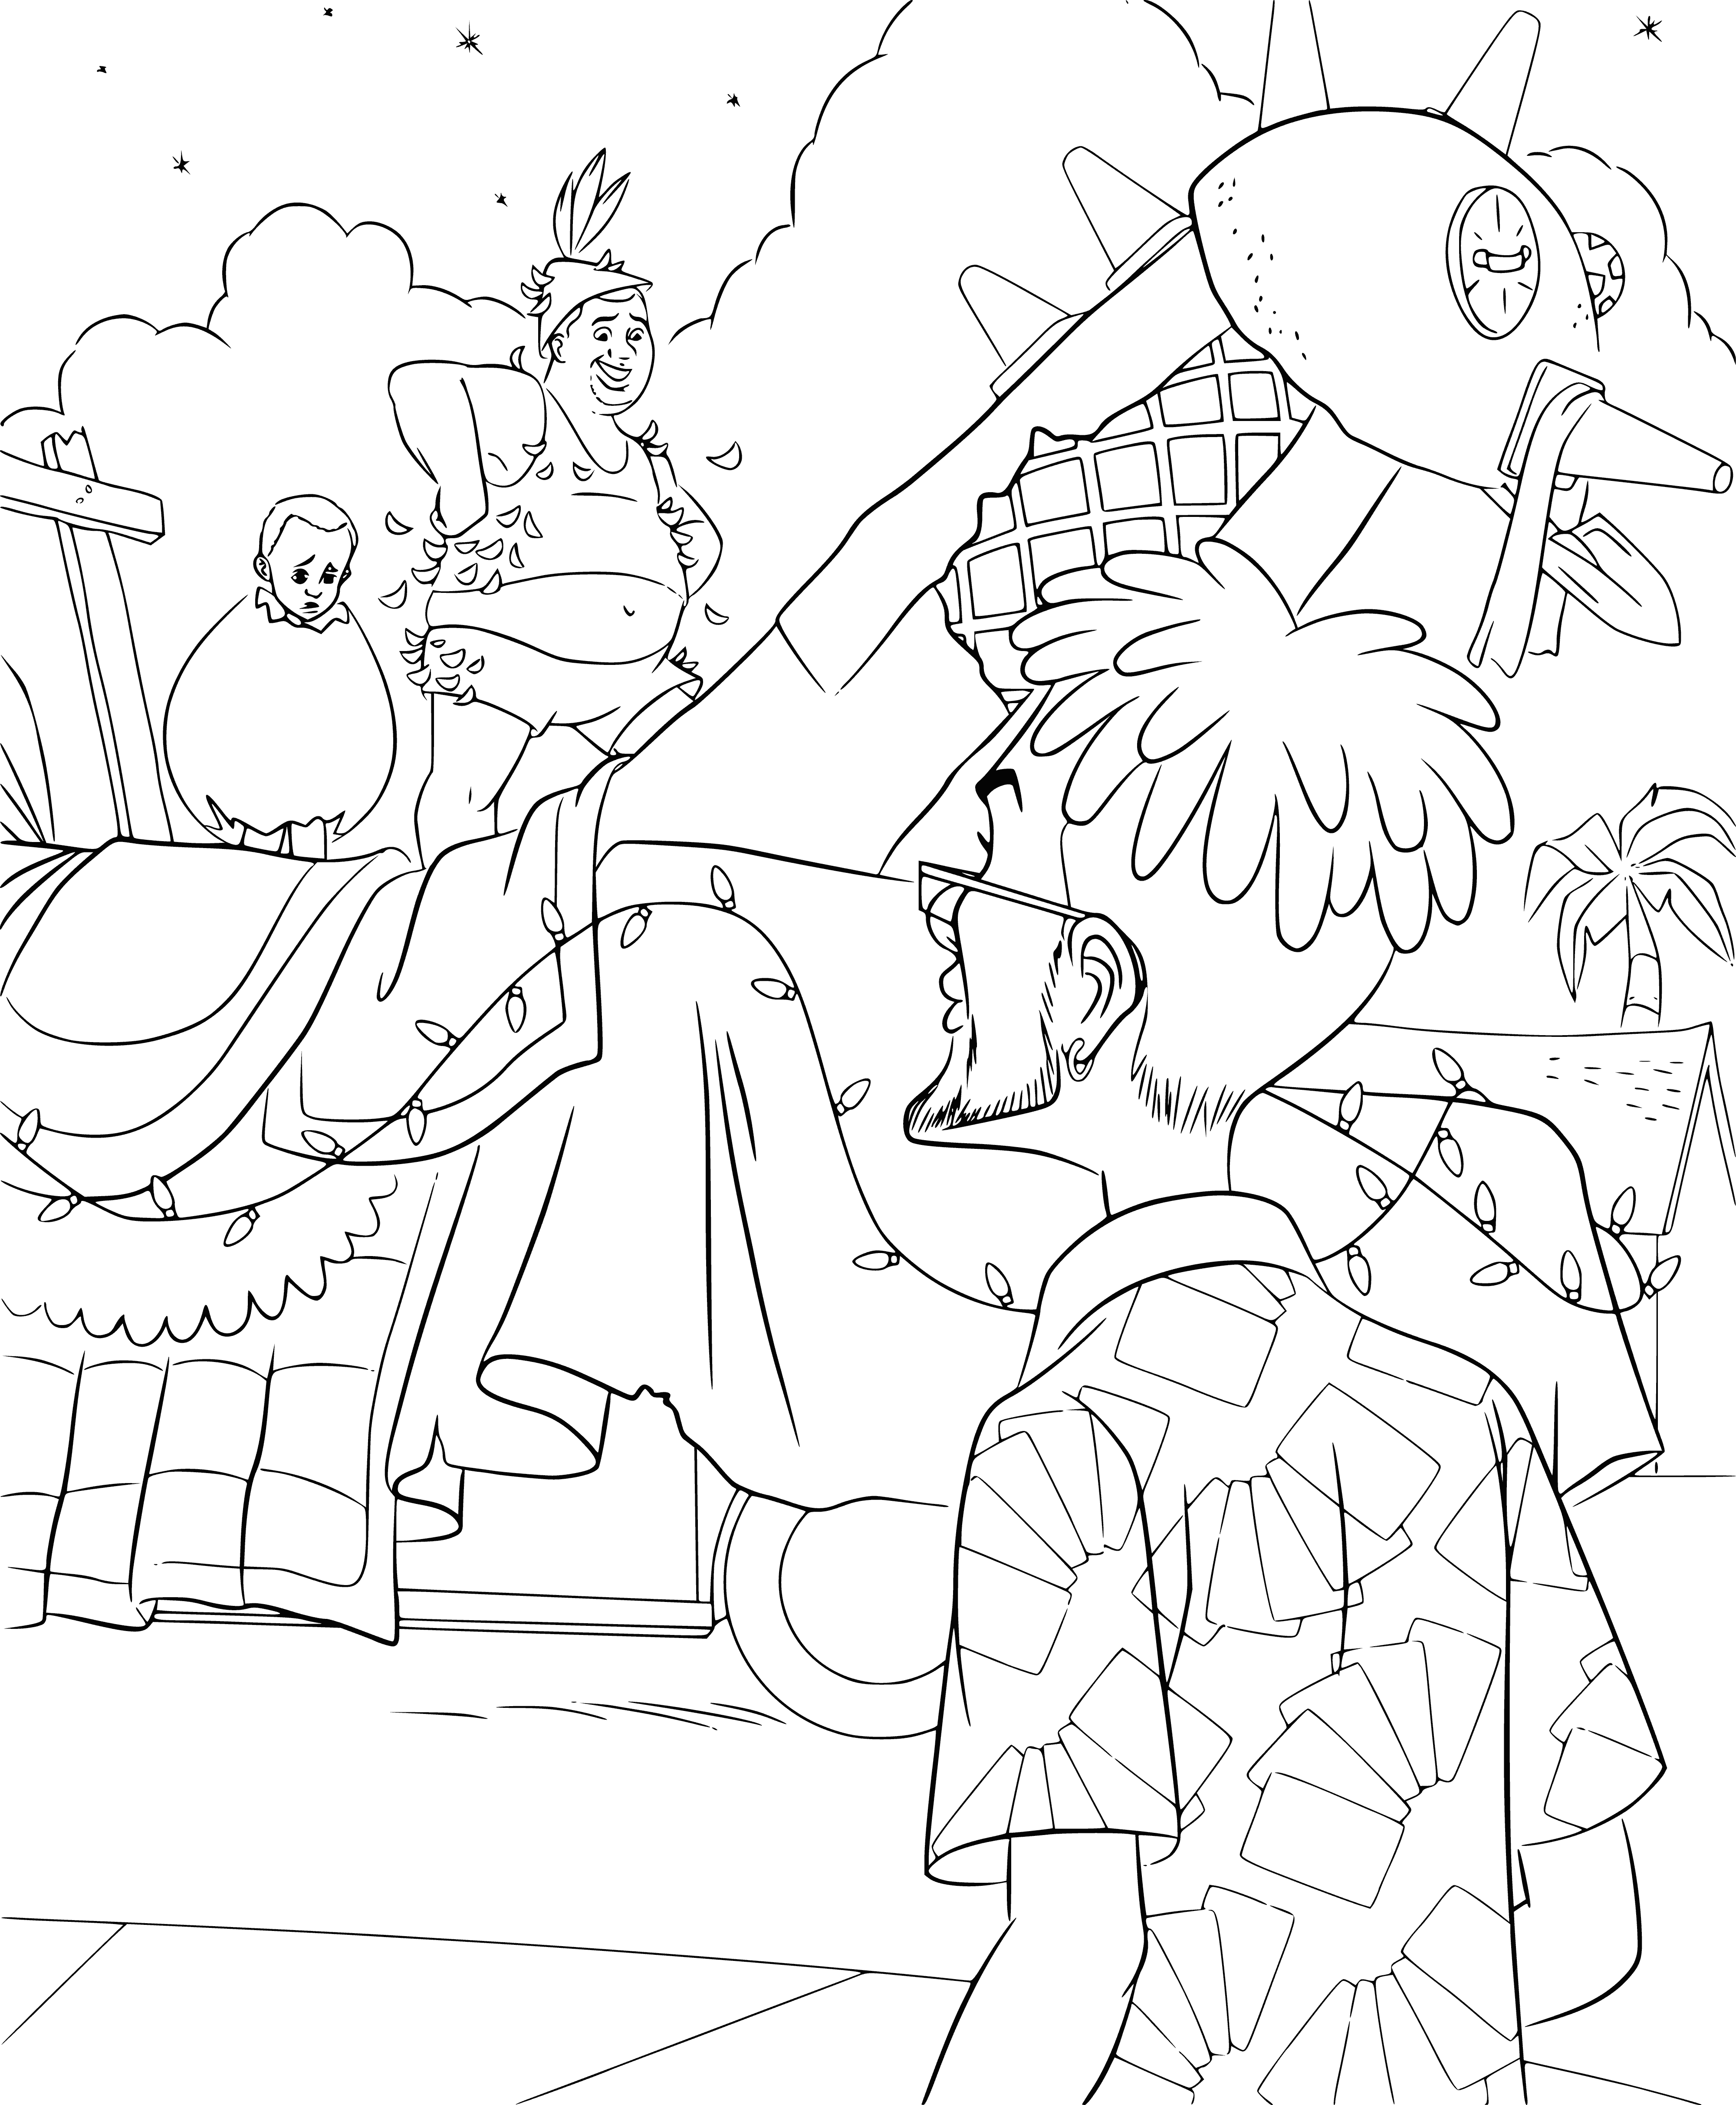 coloring page: A bridge crosses a body of water with trees, plants & buildings in the background. Mountains complete the scene.